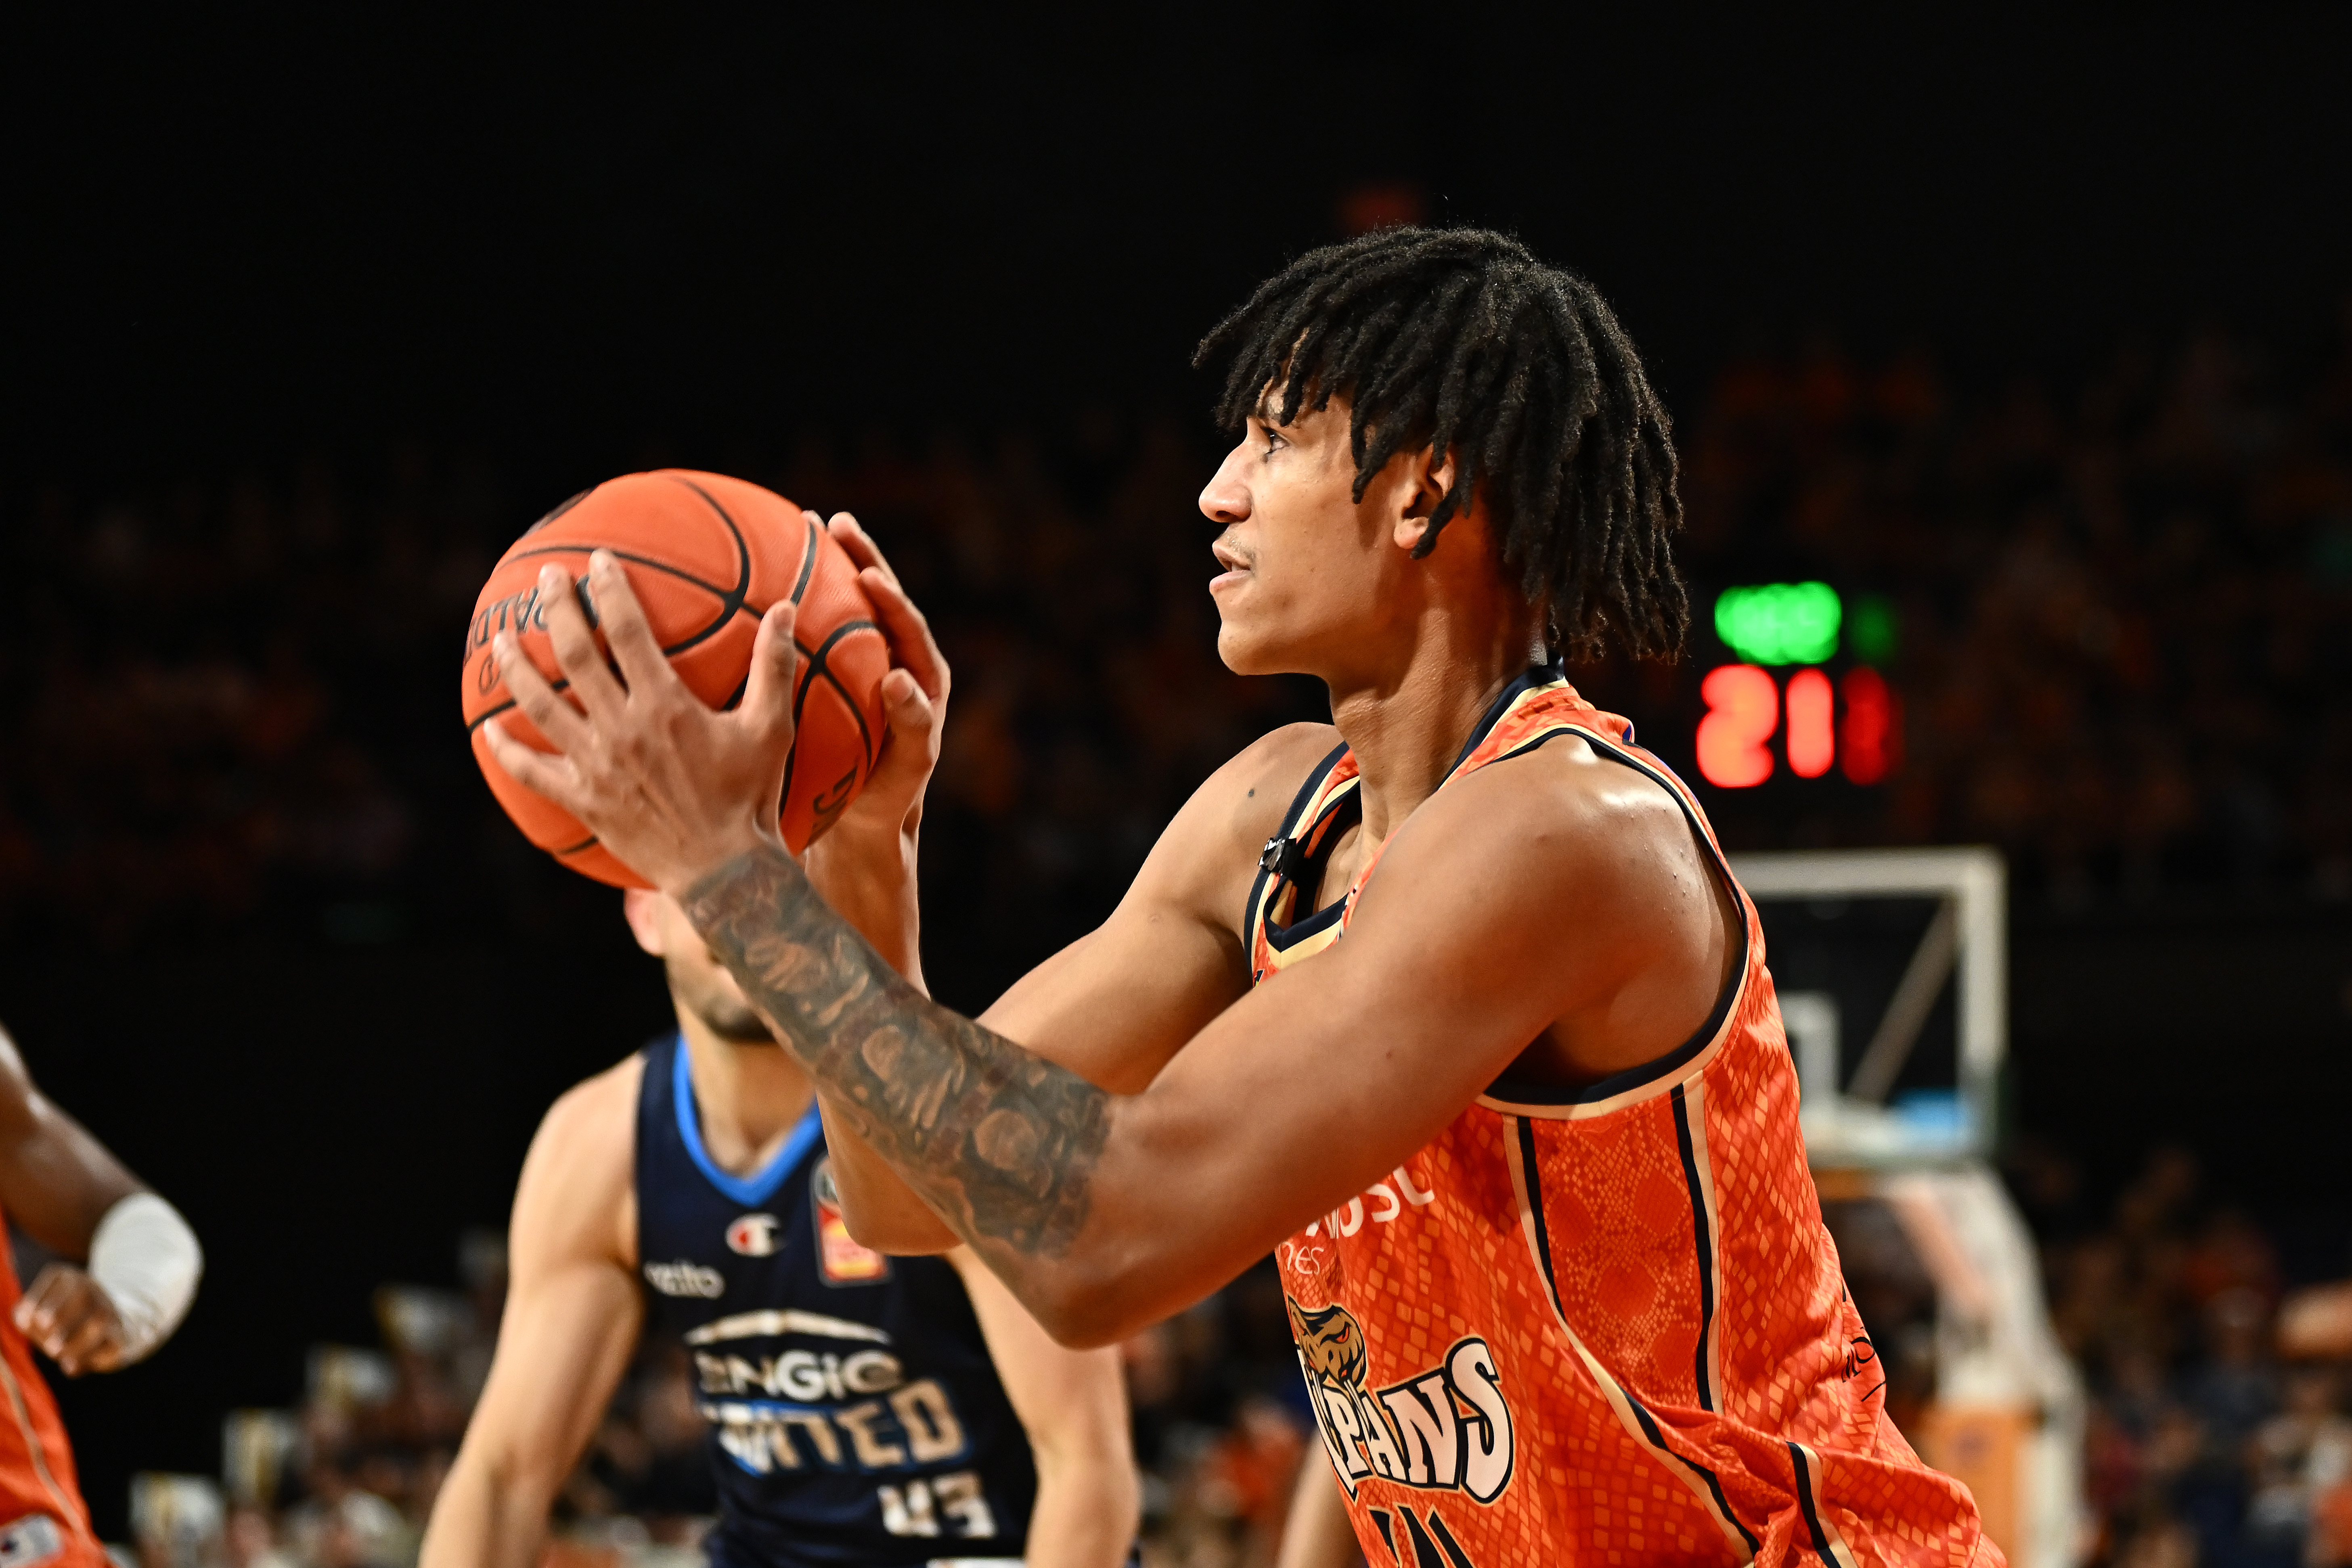 NBL Rd 20 - Cairns Taipans v Melbourne United